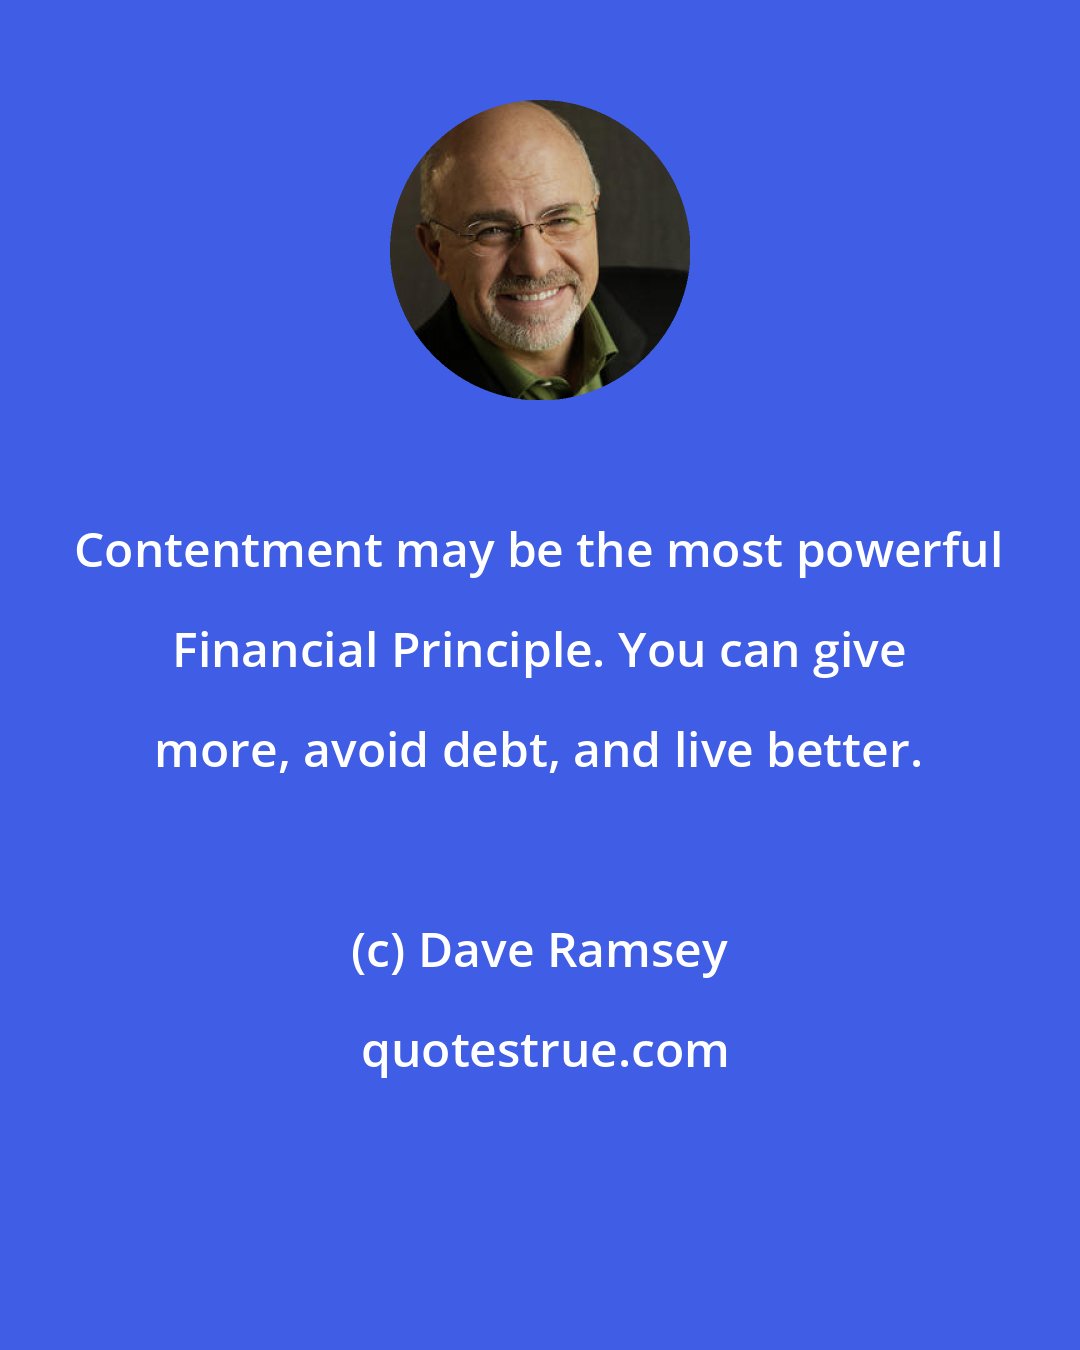 Dave Ramsey: Contentment may be the most powerful Financial Principle. You can give more, avoid debt, and live better.